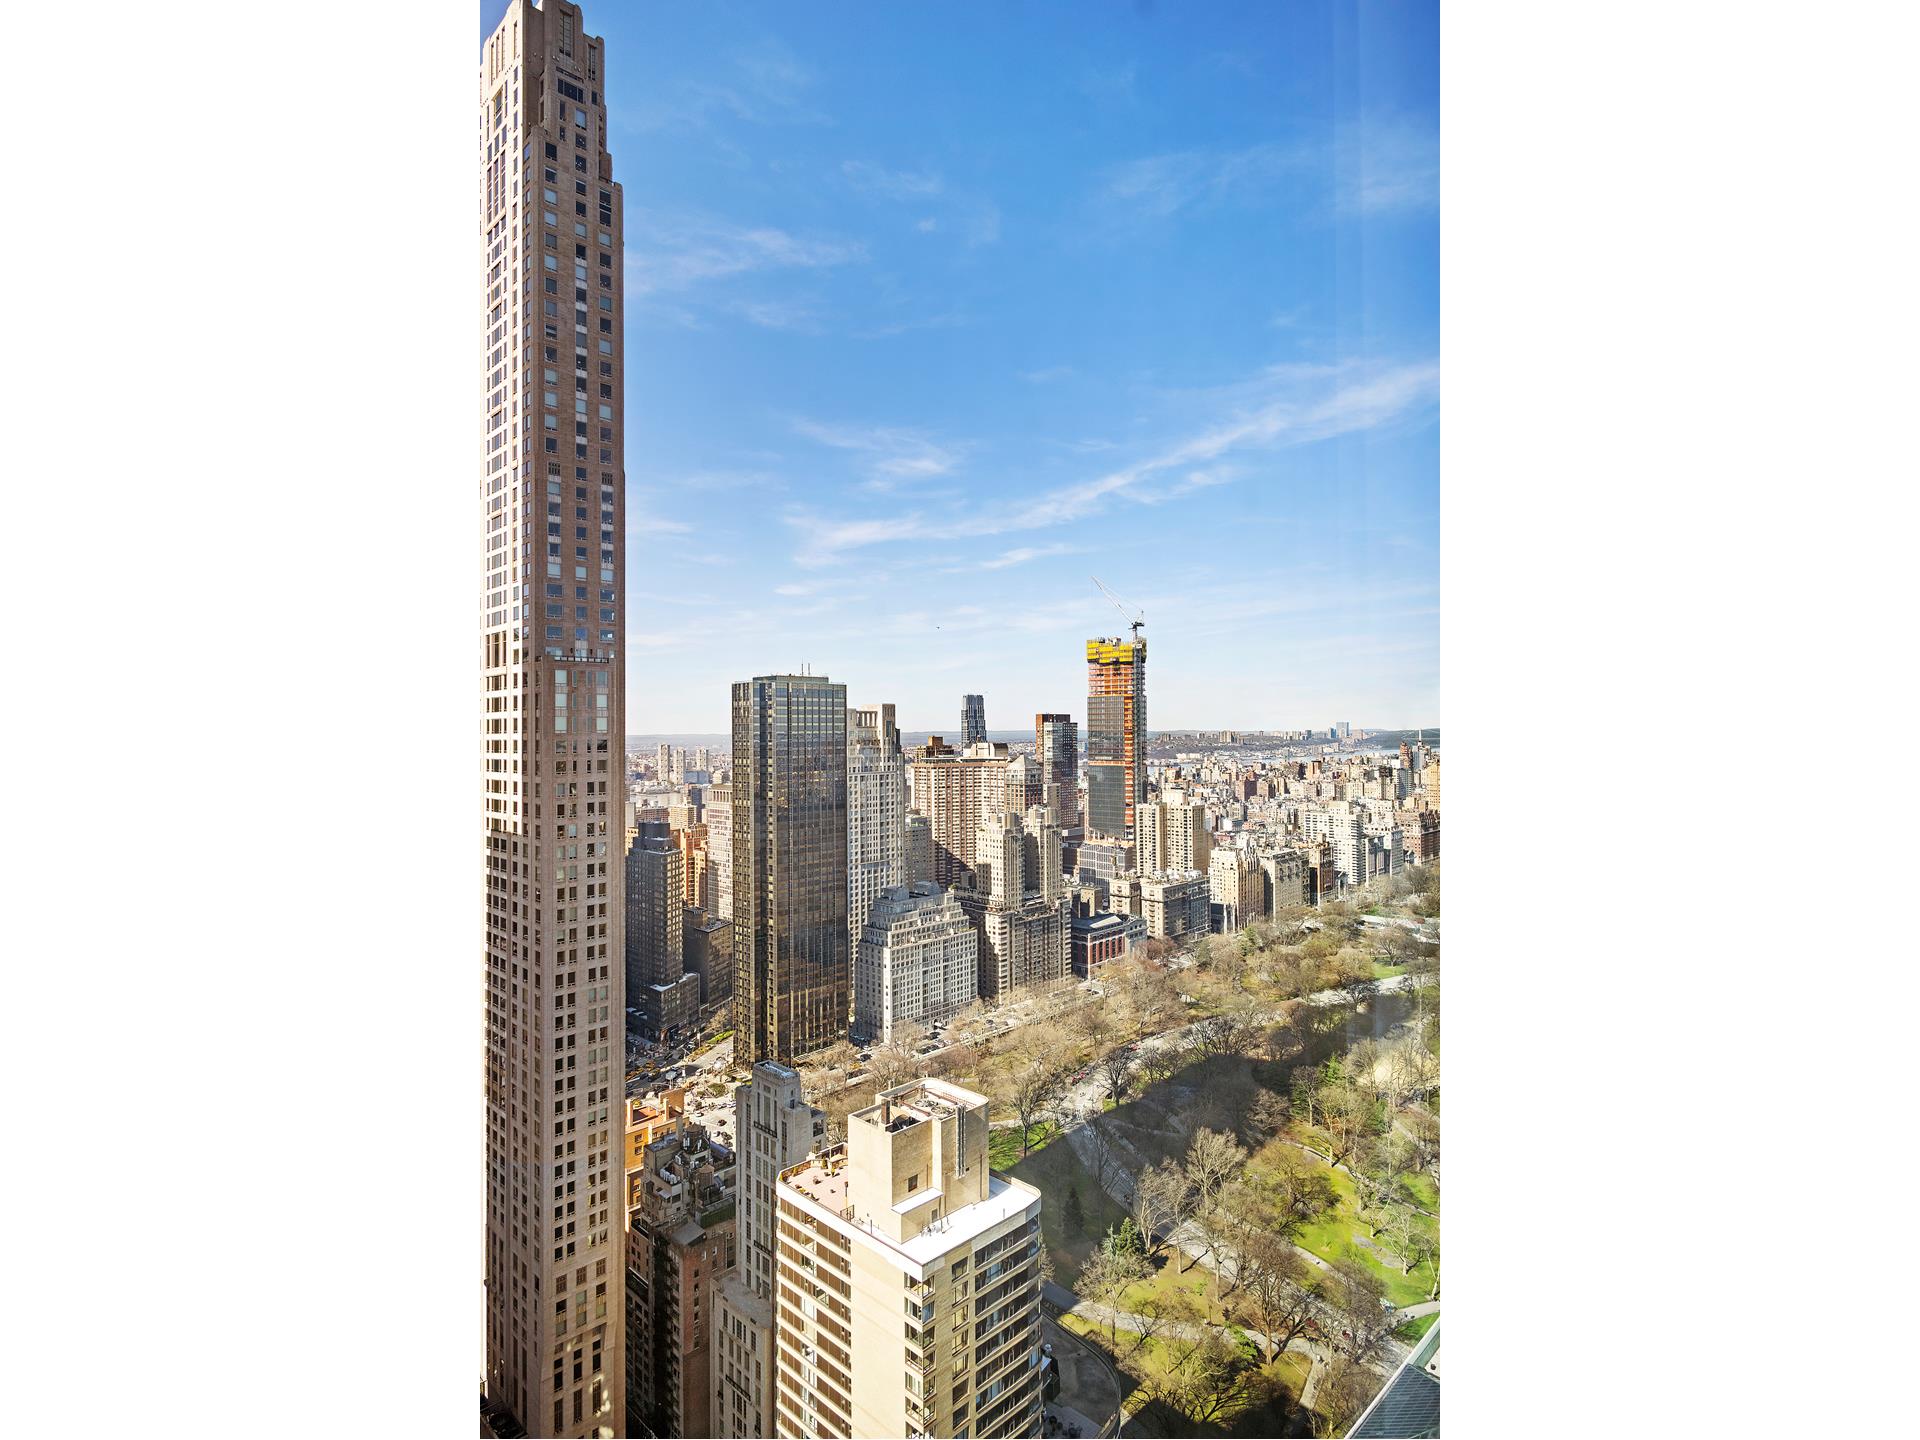 157 West 57th Street 50B, Central Park South, Midtown West, NYC - 2 Bedrooms  
2.5 Bathrooms  
4 Rooms - 